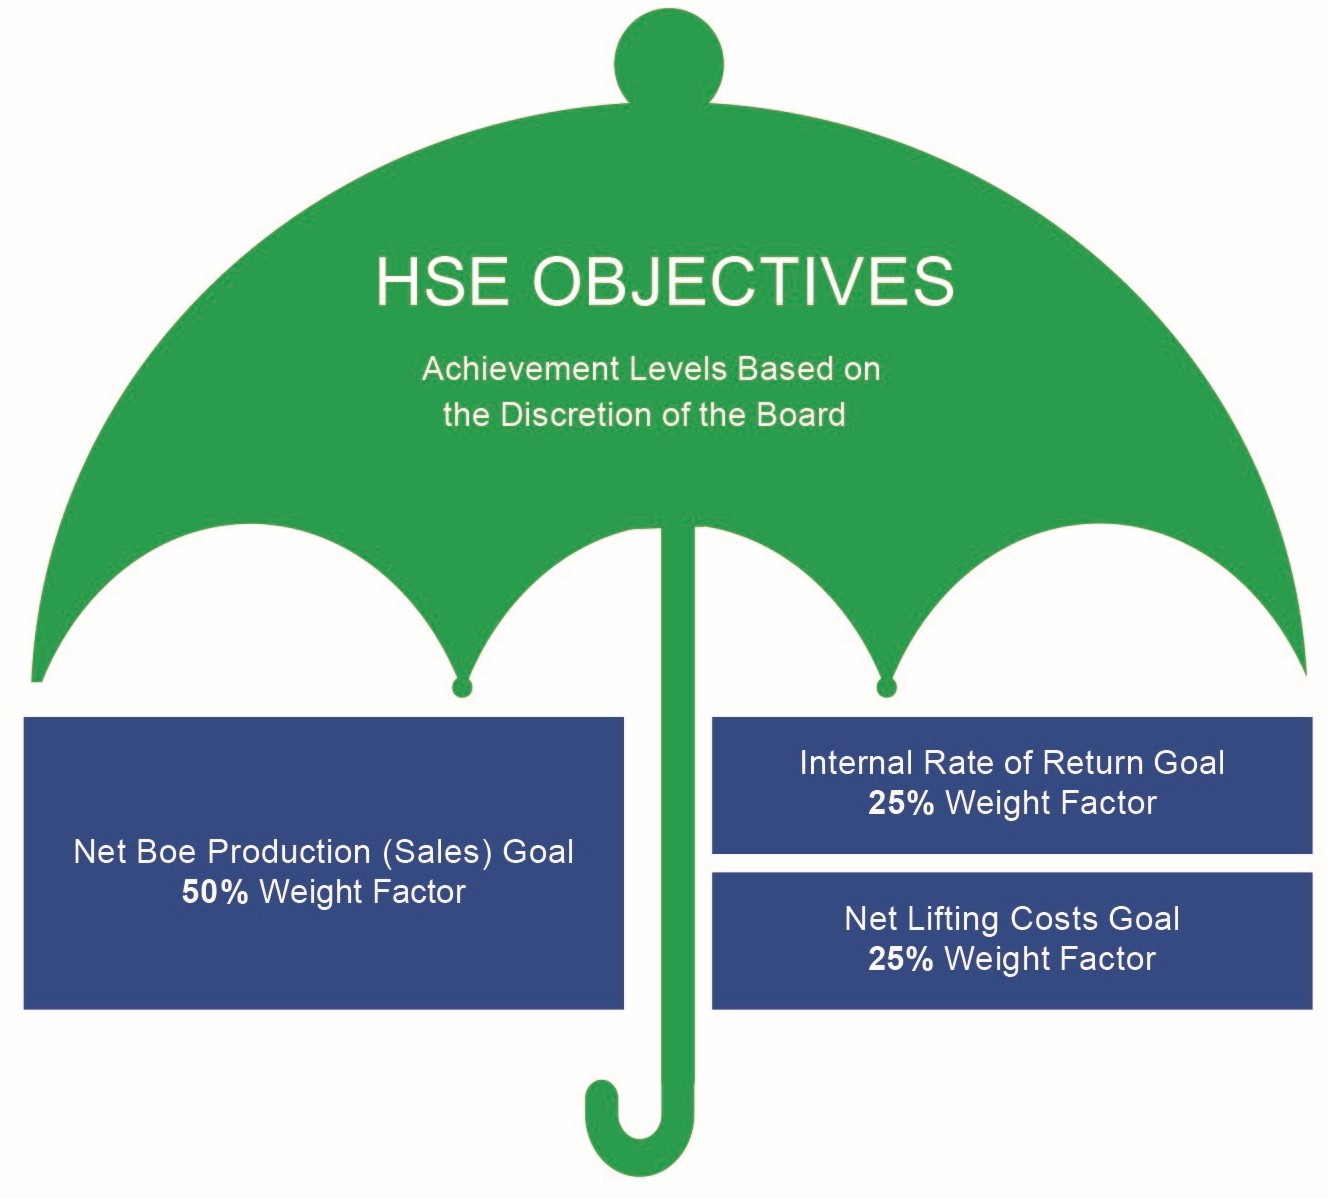 HSE Objectives Graphic_3.jpg